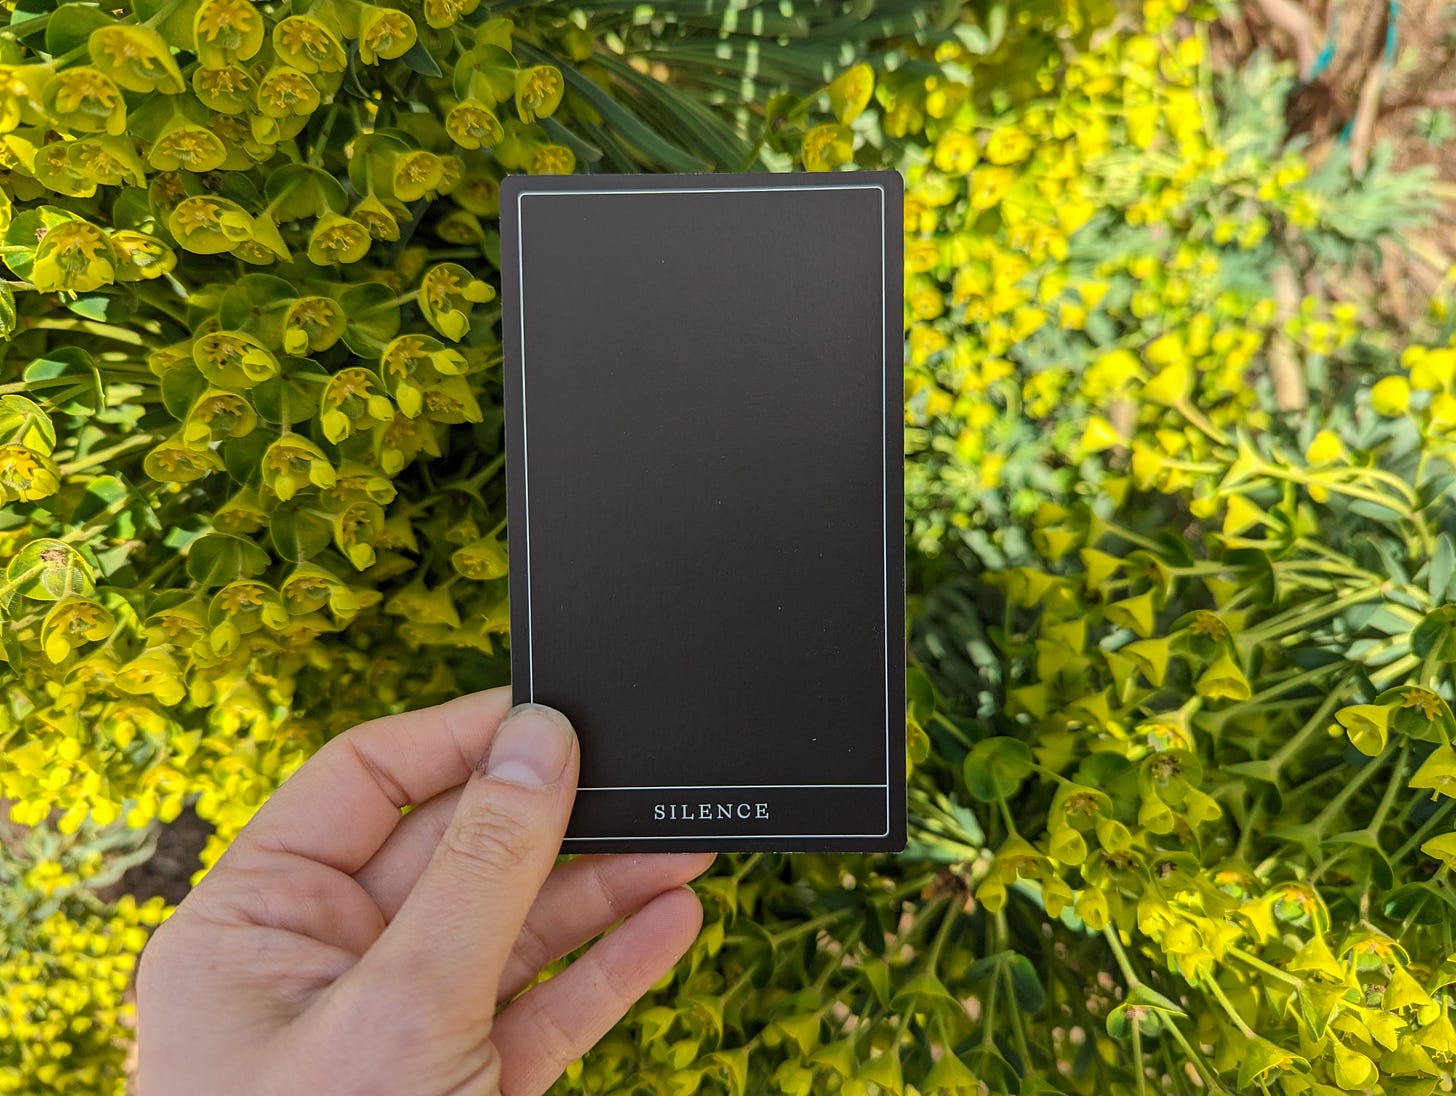 A hand holds up an oracle card that has a black background and white text that reads "silence." The oracle card is being held up in a garden, against the backdrop of a flowering yellow and green bush.